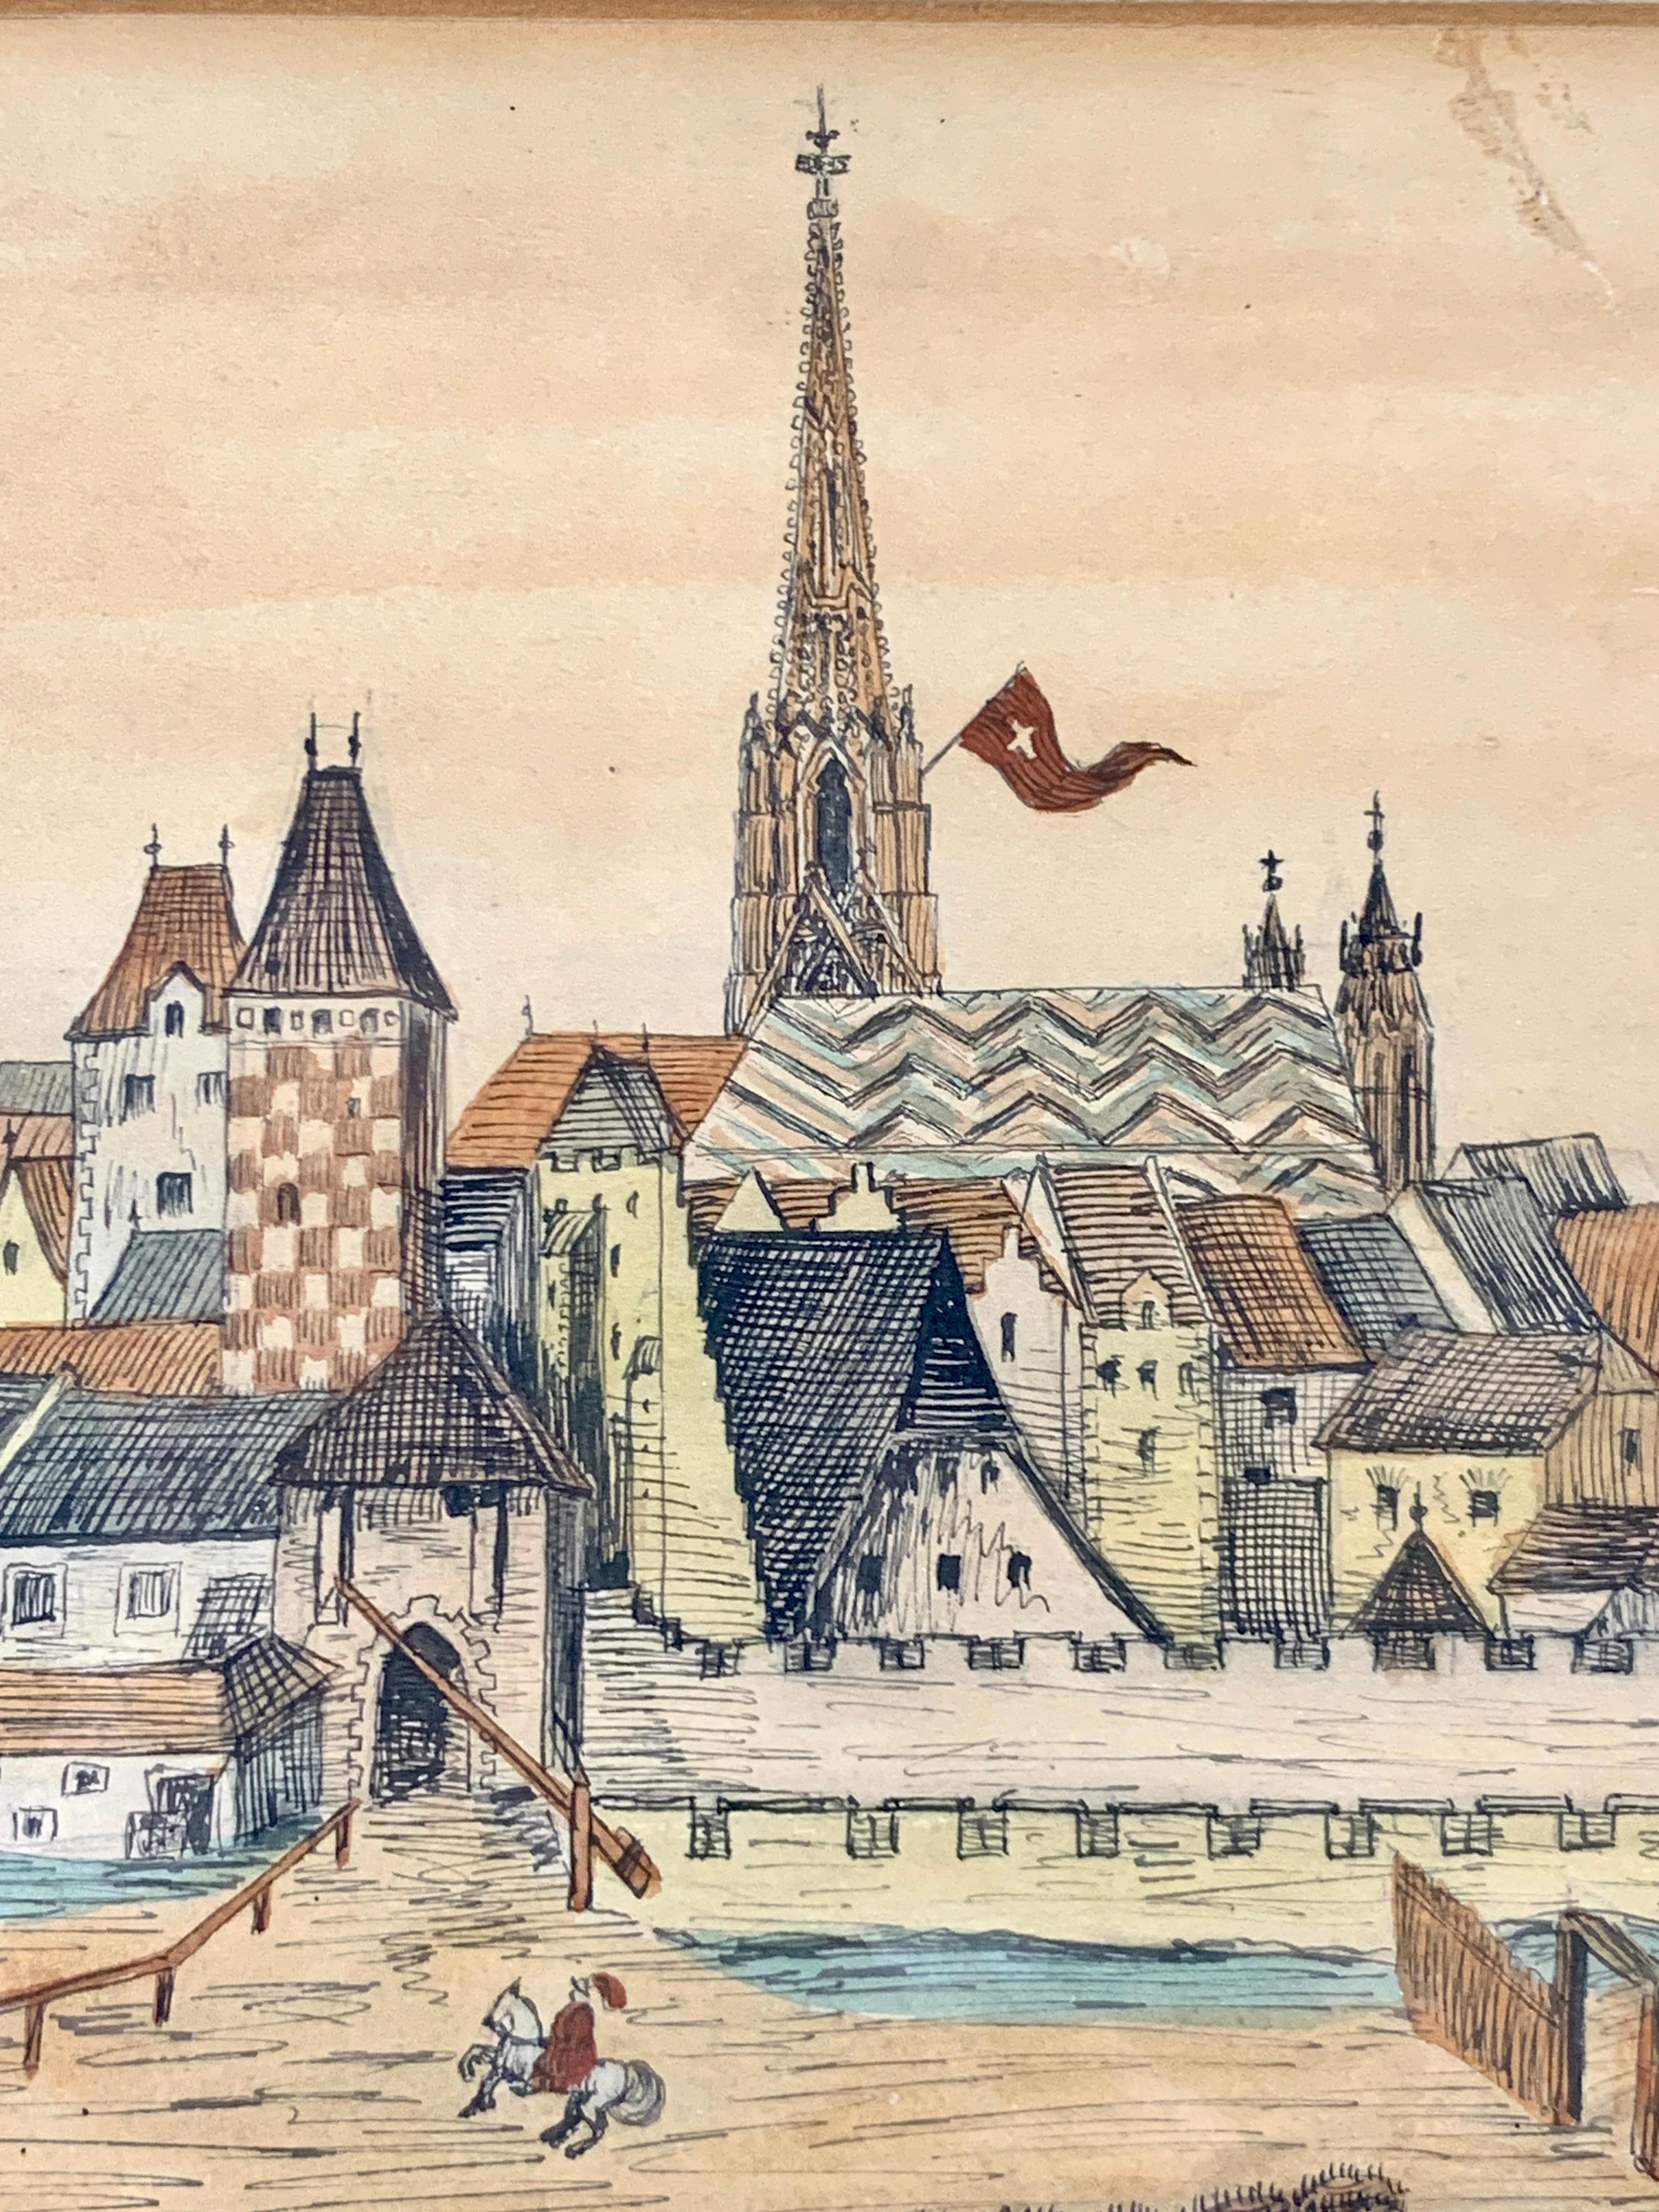 This 19th century watercolor with pen and ink is most likely Dutch, having been acquired in Holland. It shows a romantic scene of an attractive walled city with buildings and rooftops beyond a fortified wall with an open gate. Outside the wall, a